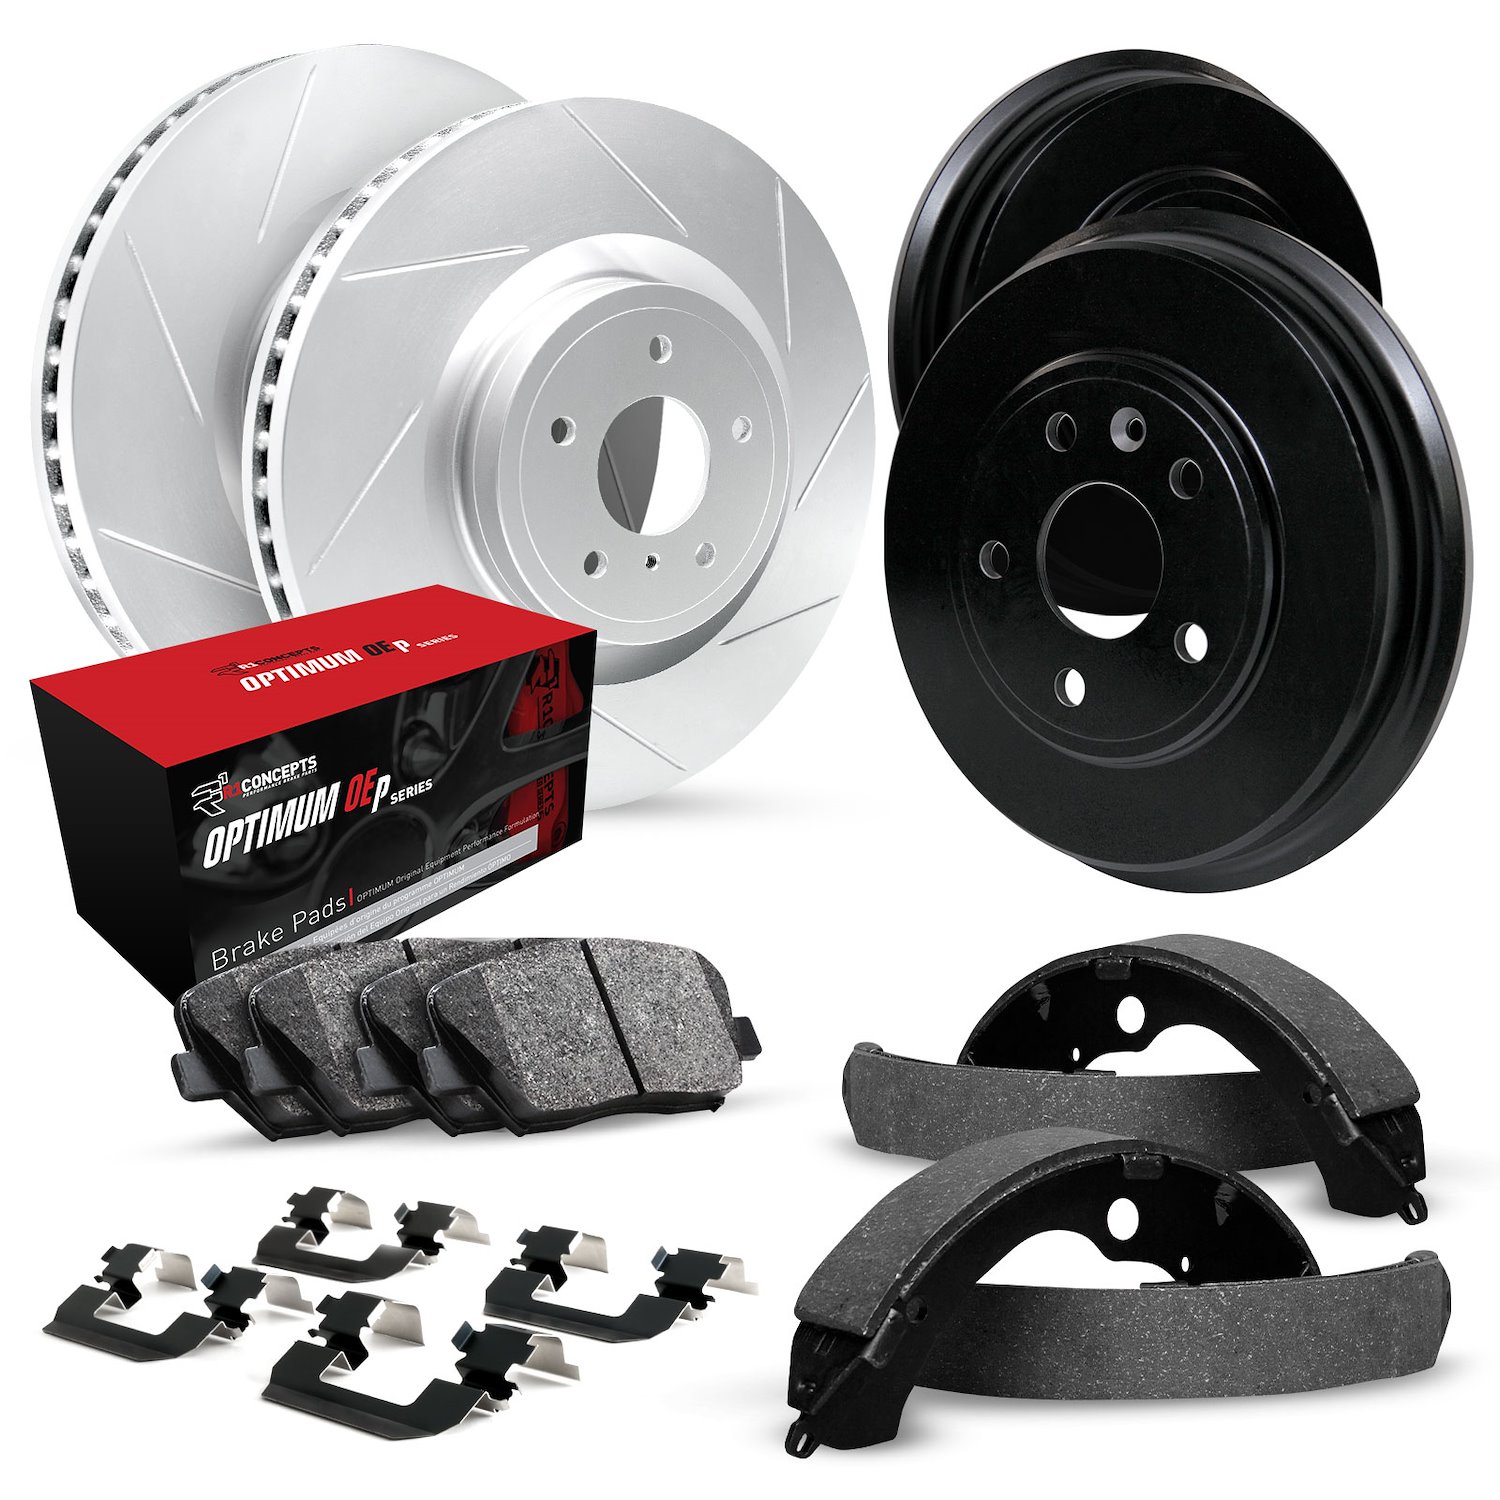 GEO-Carbon Slotted Brake Rotor & Drum Set w/Optimum OE Pads, Shoes, & Hardware, 2000-2001 Ford/Lincoln/Mercury/Mazda